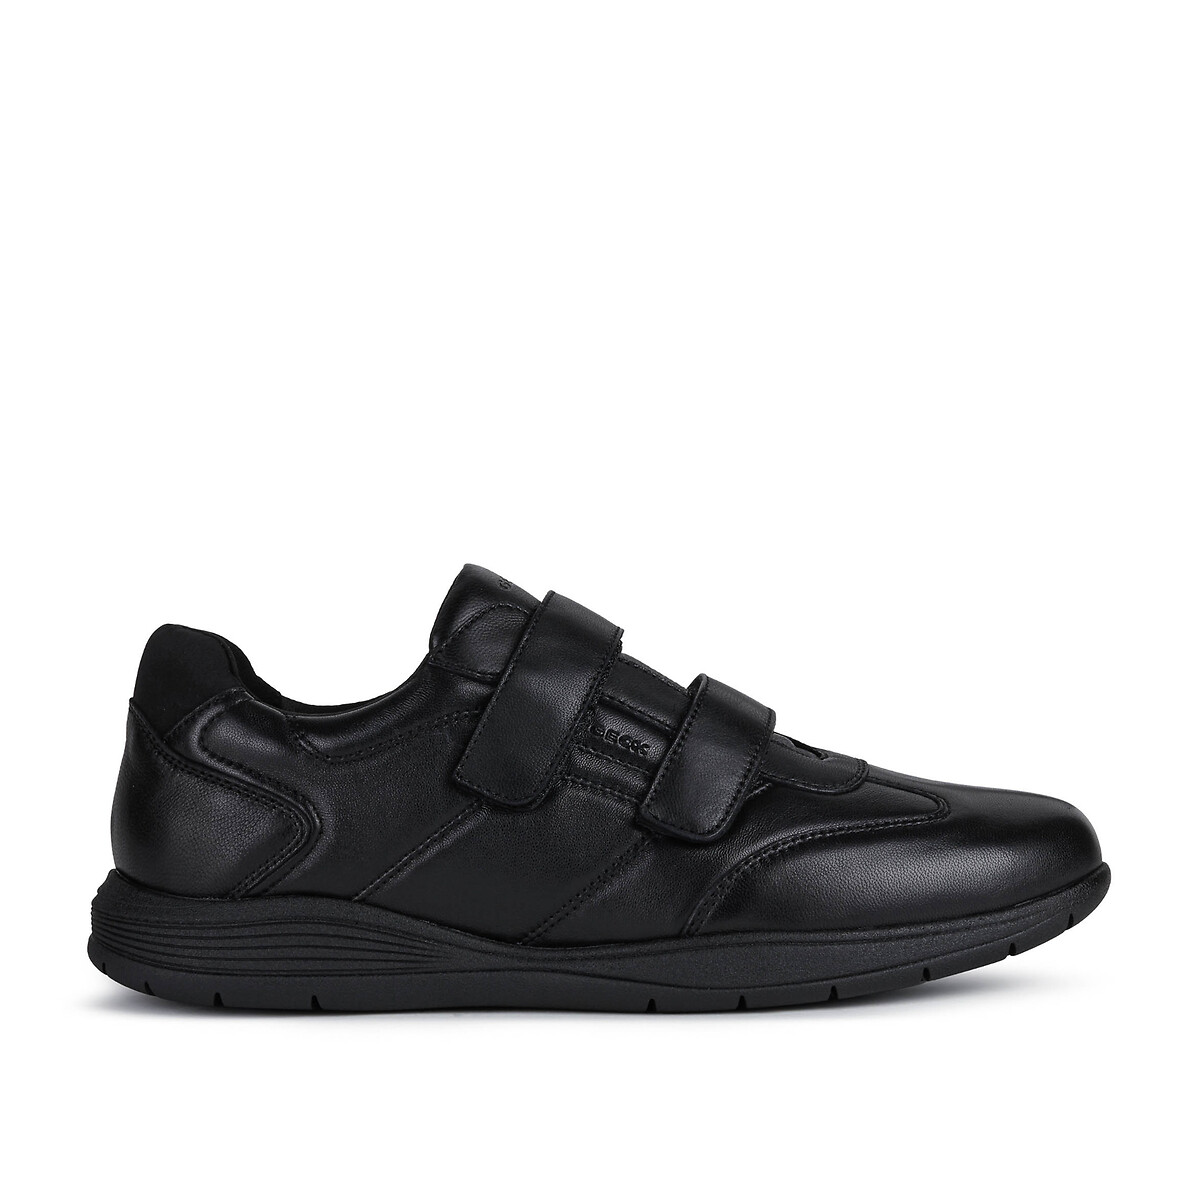 Spherica Ec2 Breathable Trainers in Leather with Touch ’n’ Close Fastening